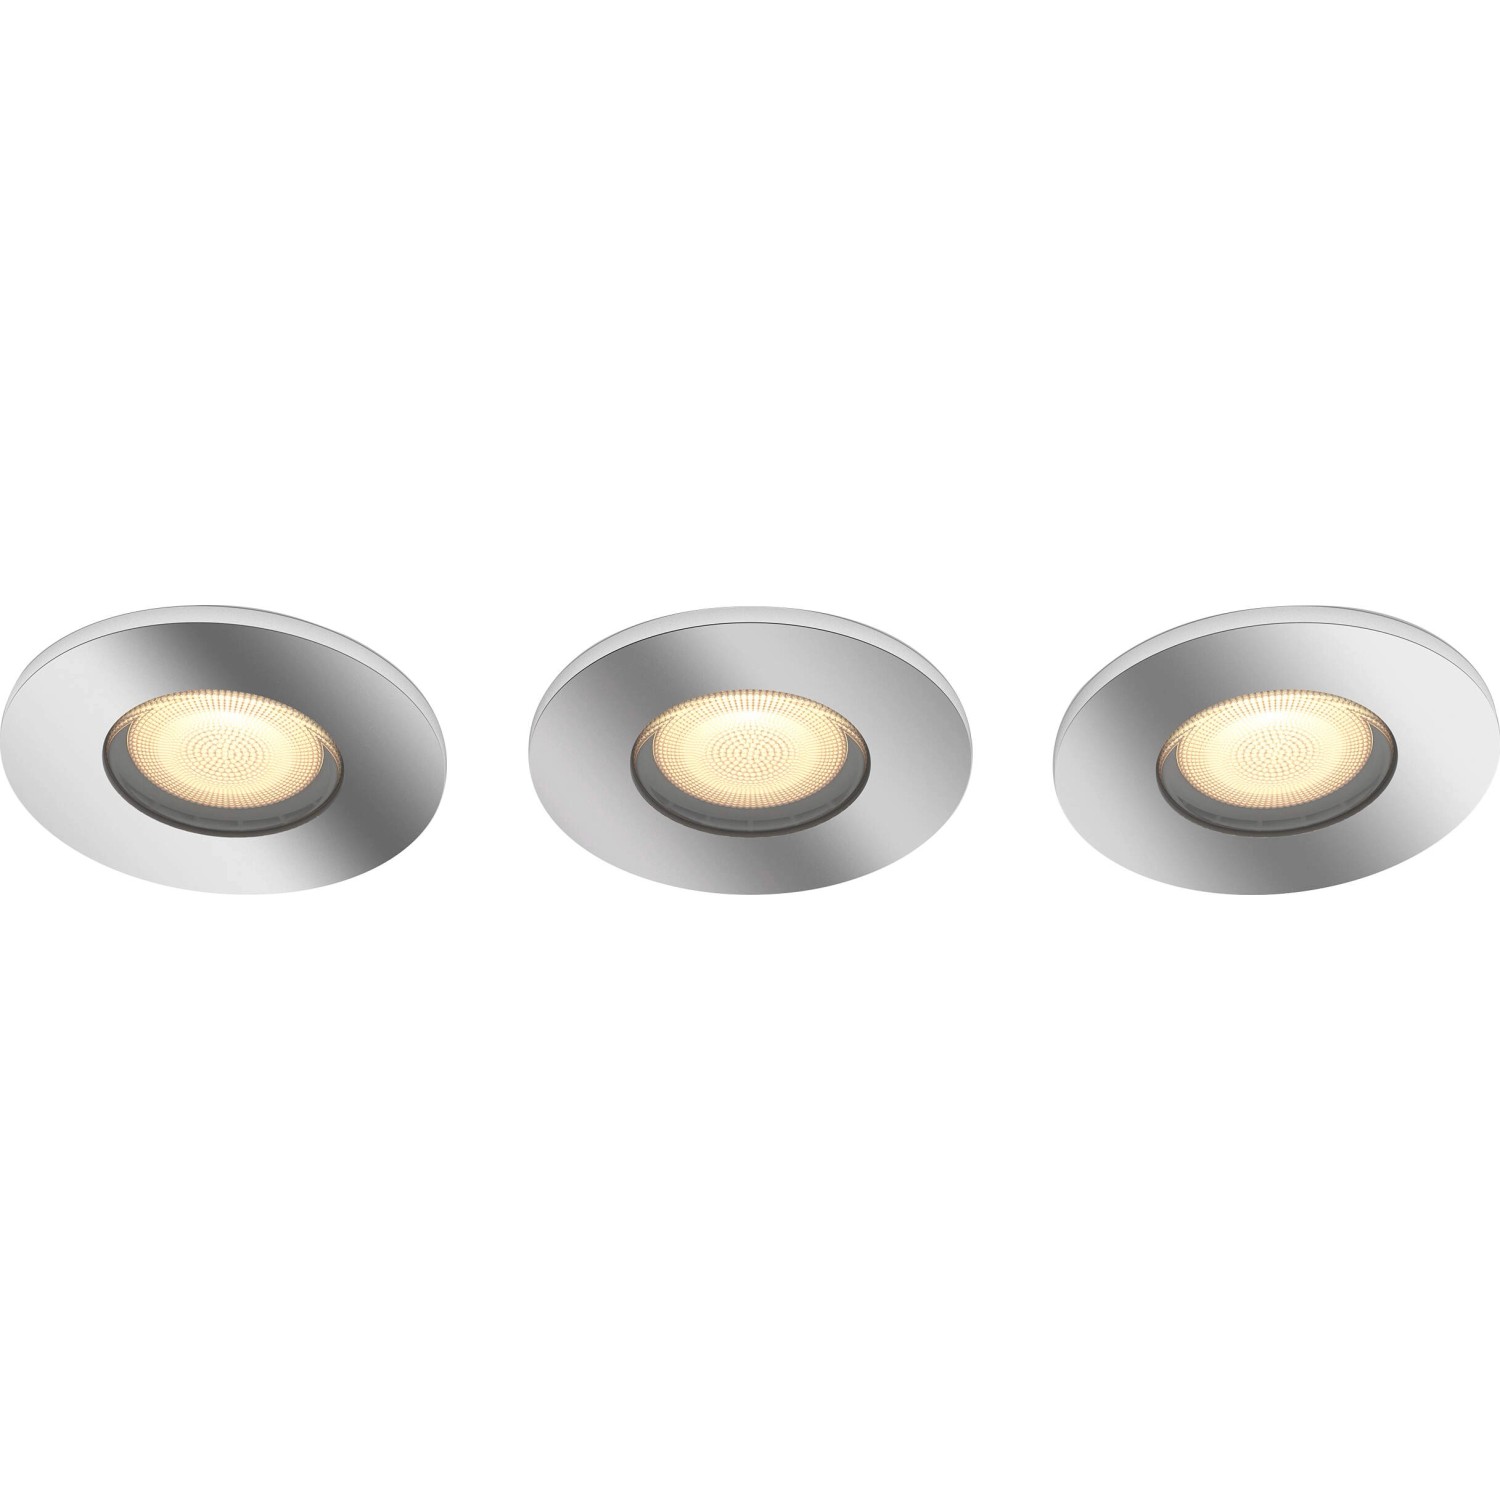 Philips Hue Spot 3-flg. White Ambiance Adore rund Silber 250 lm inkl. Dimmer